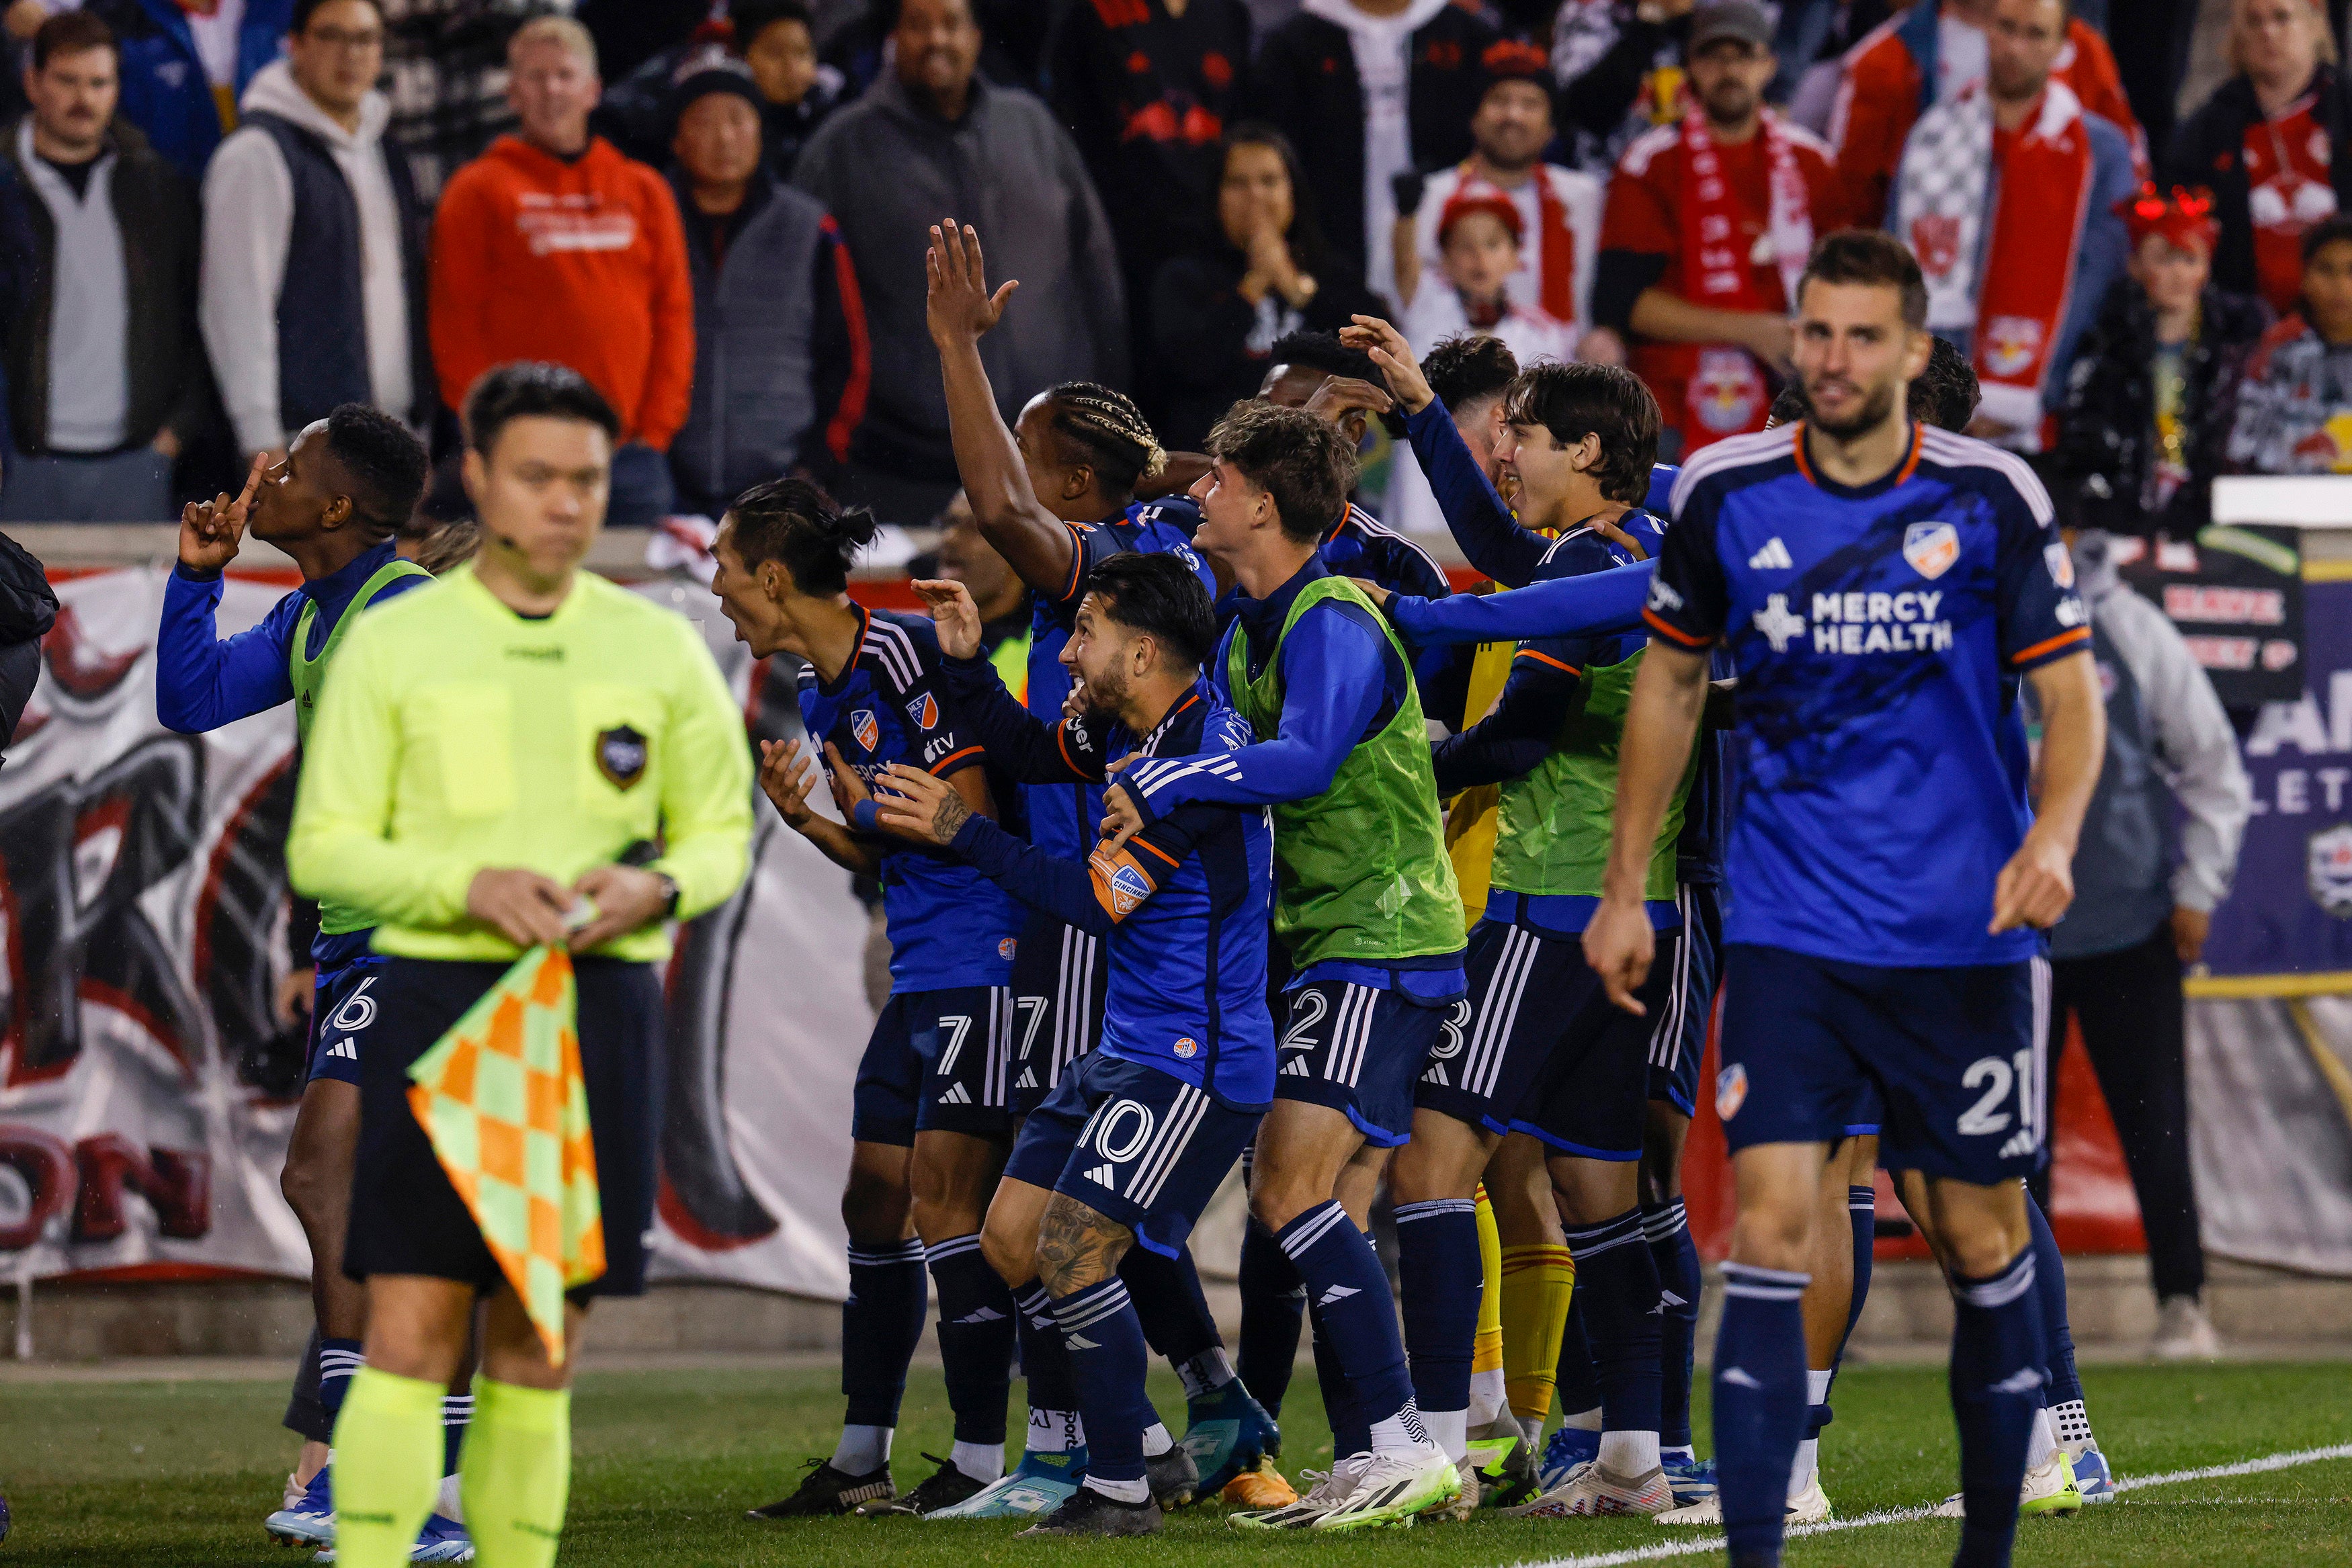 The incident occurred after an MLS playoff match between FC Cincinnati and New York Red Bulls